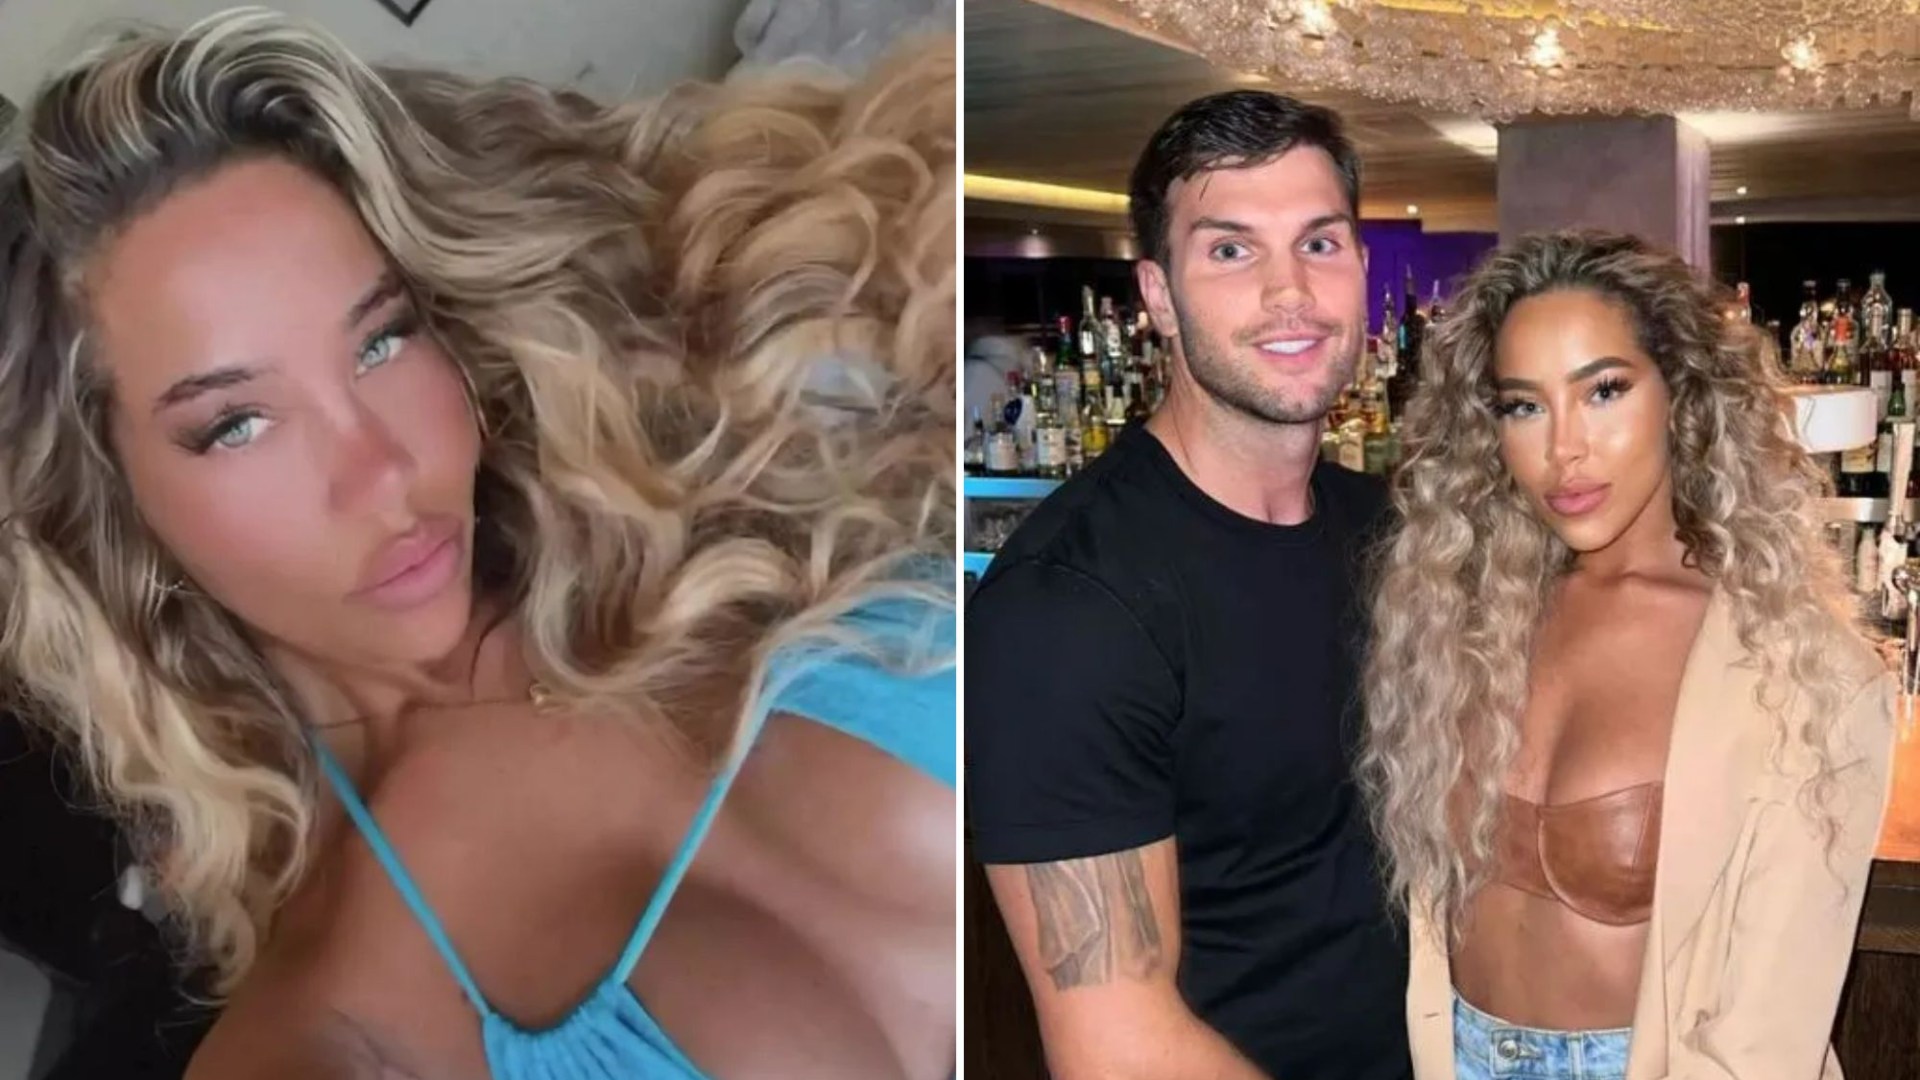 Dani Imbert fuel rumors of another breakup with footballer beau after cryptic post – Towie drama unfolds